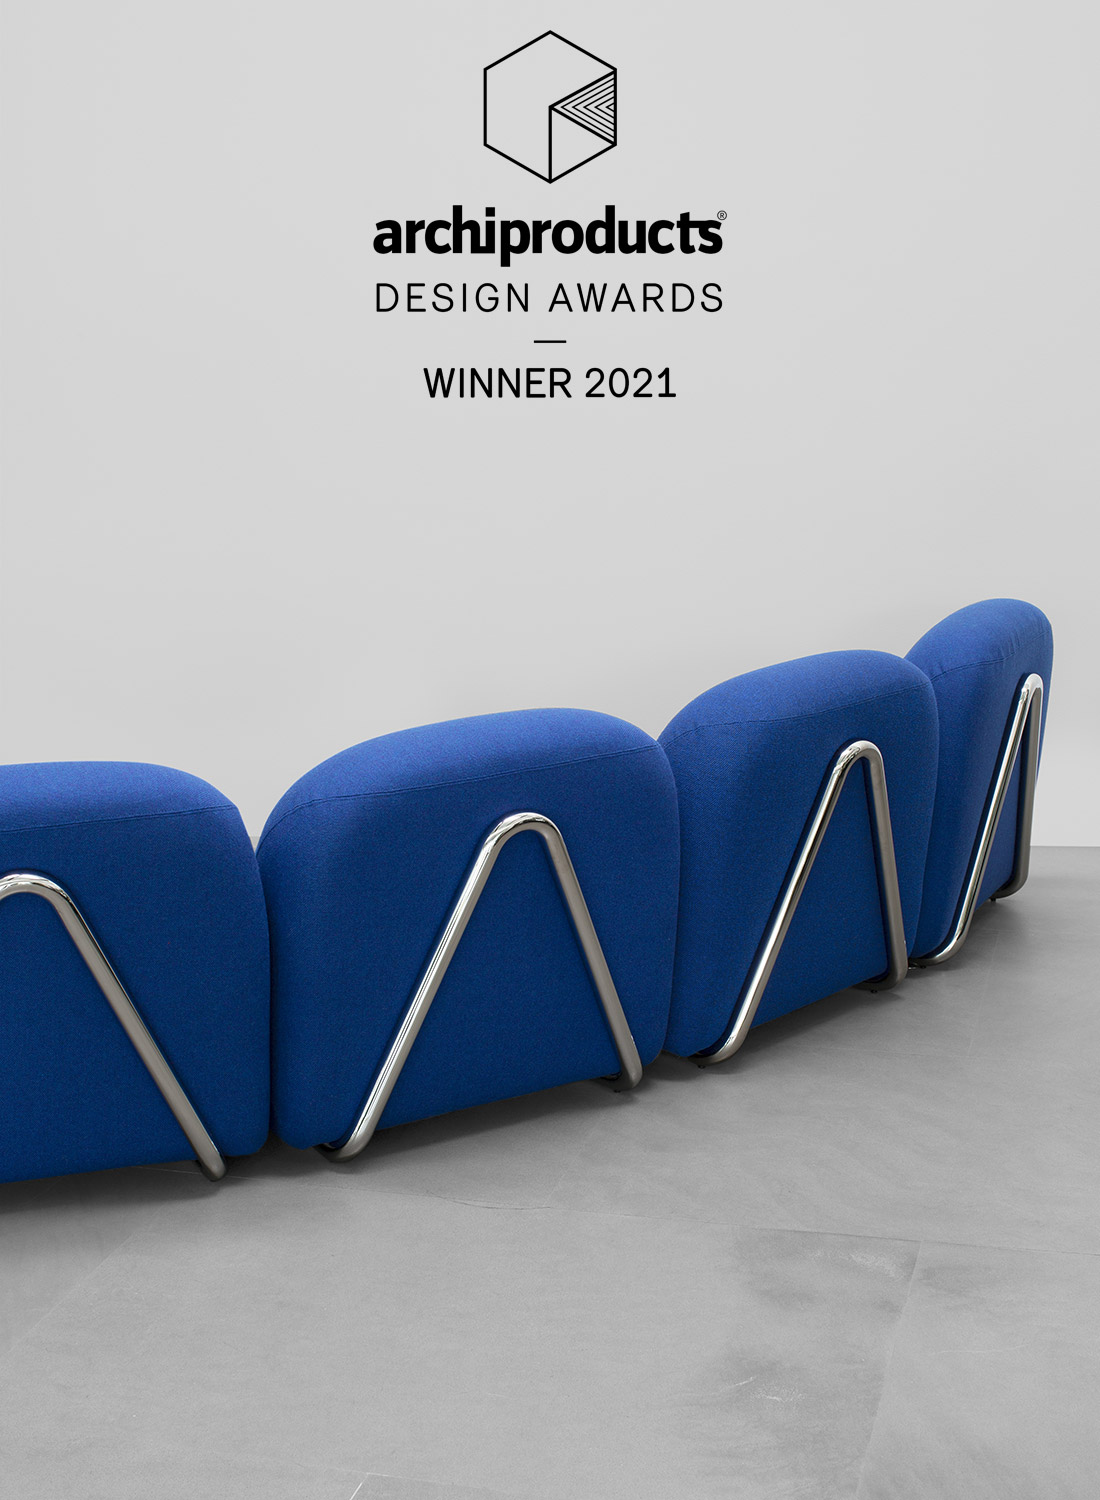 2021 Archiproducts Design Awards Victoria Tacchini 5181